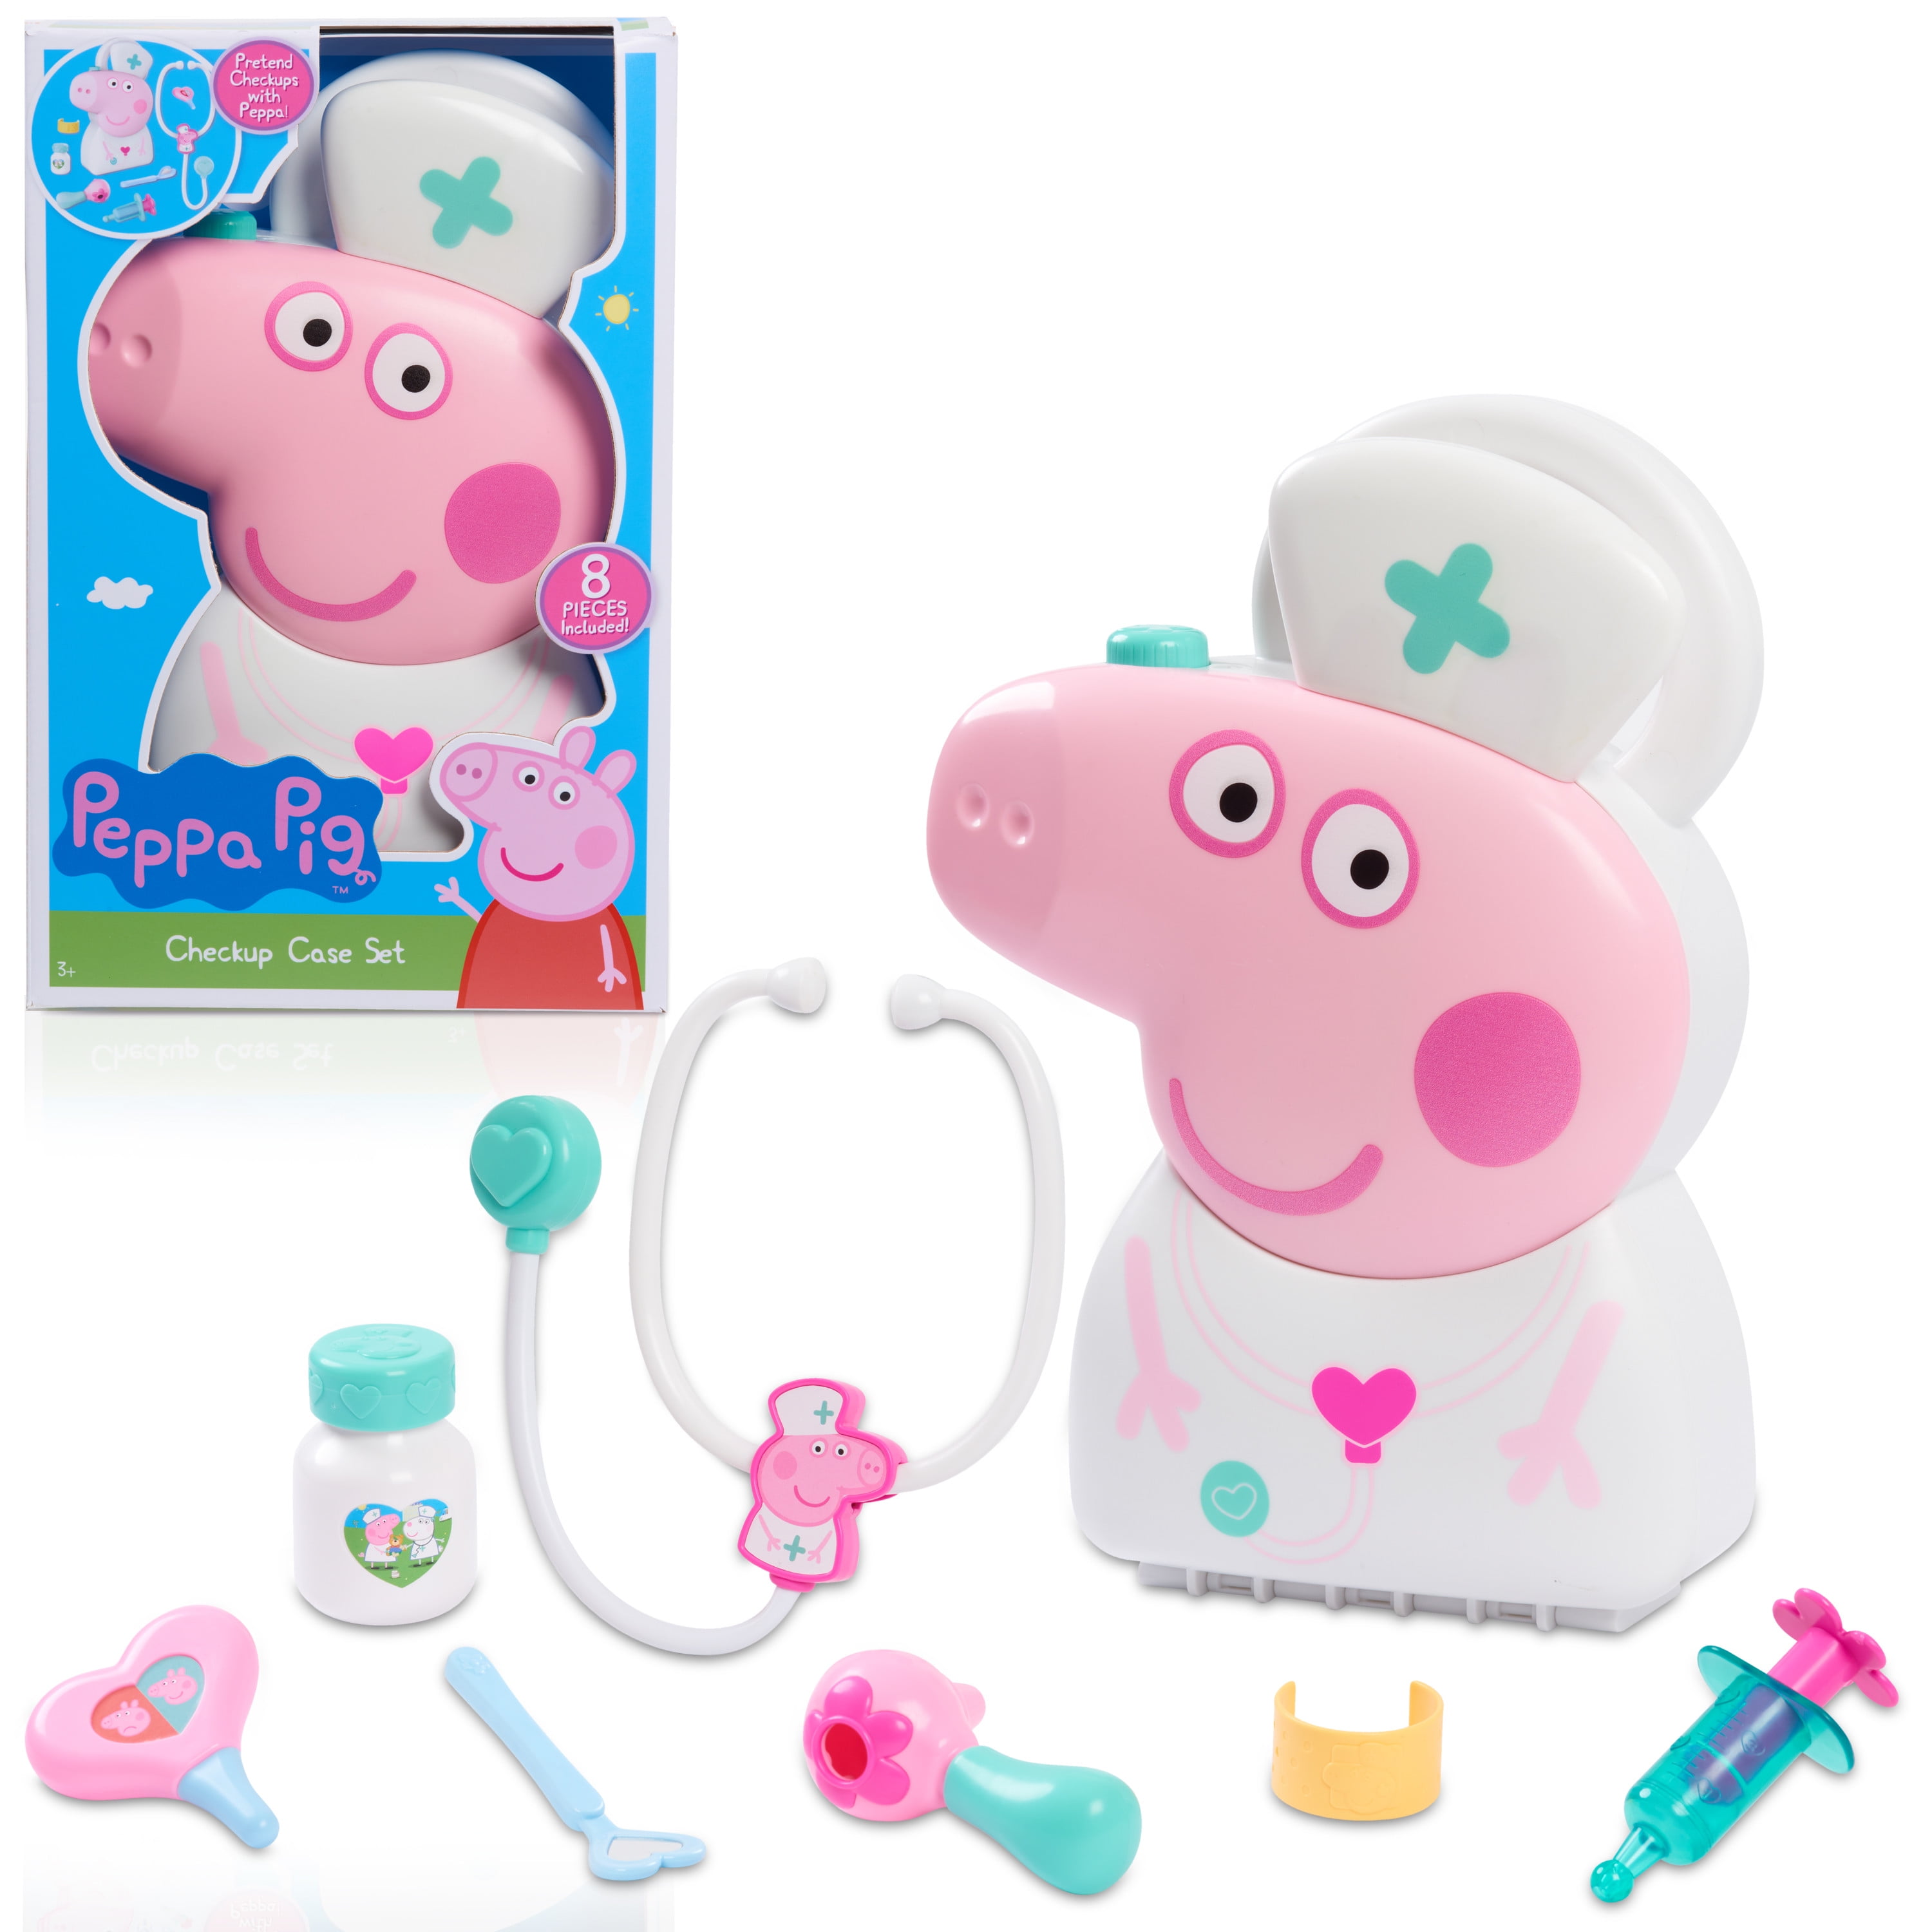 Peppa Pig 6 Inch Plush Figure NEW IN STOCK Plushies TV Show 